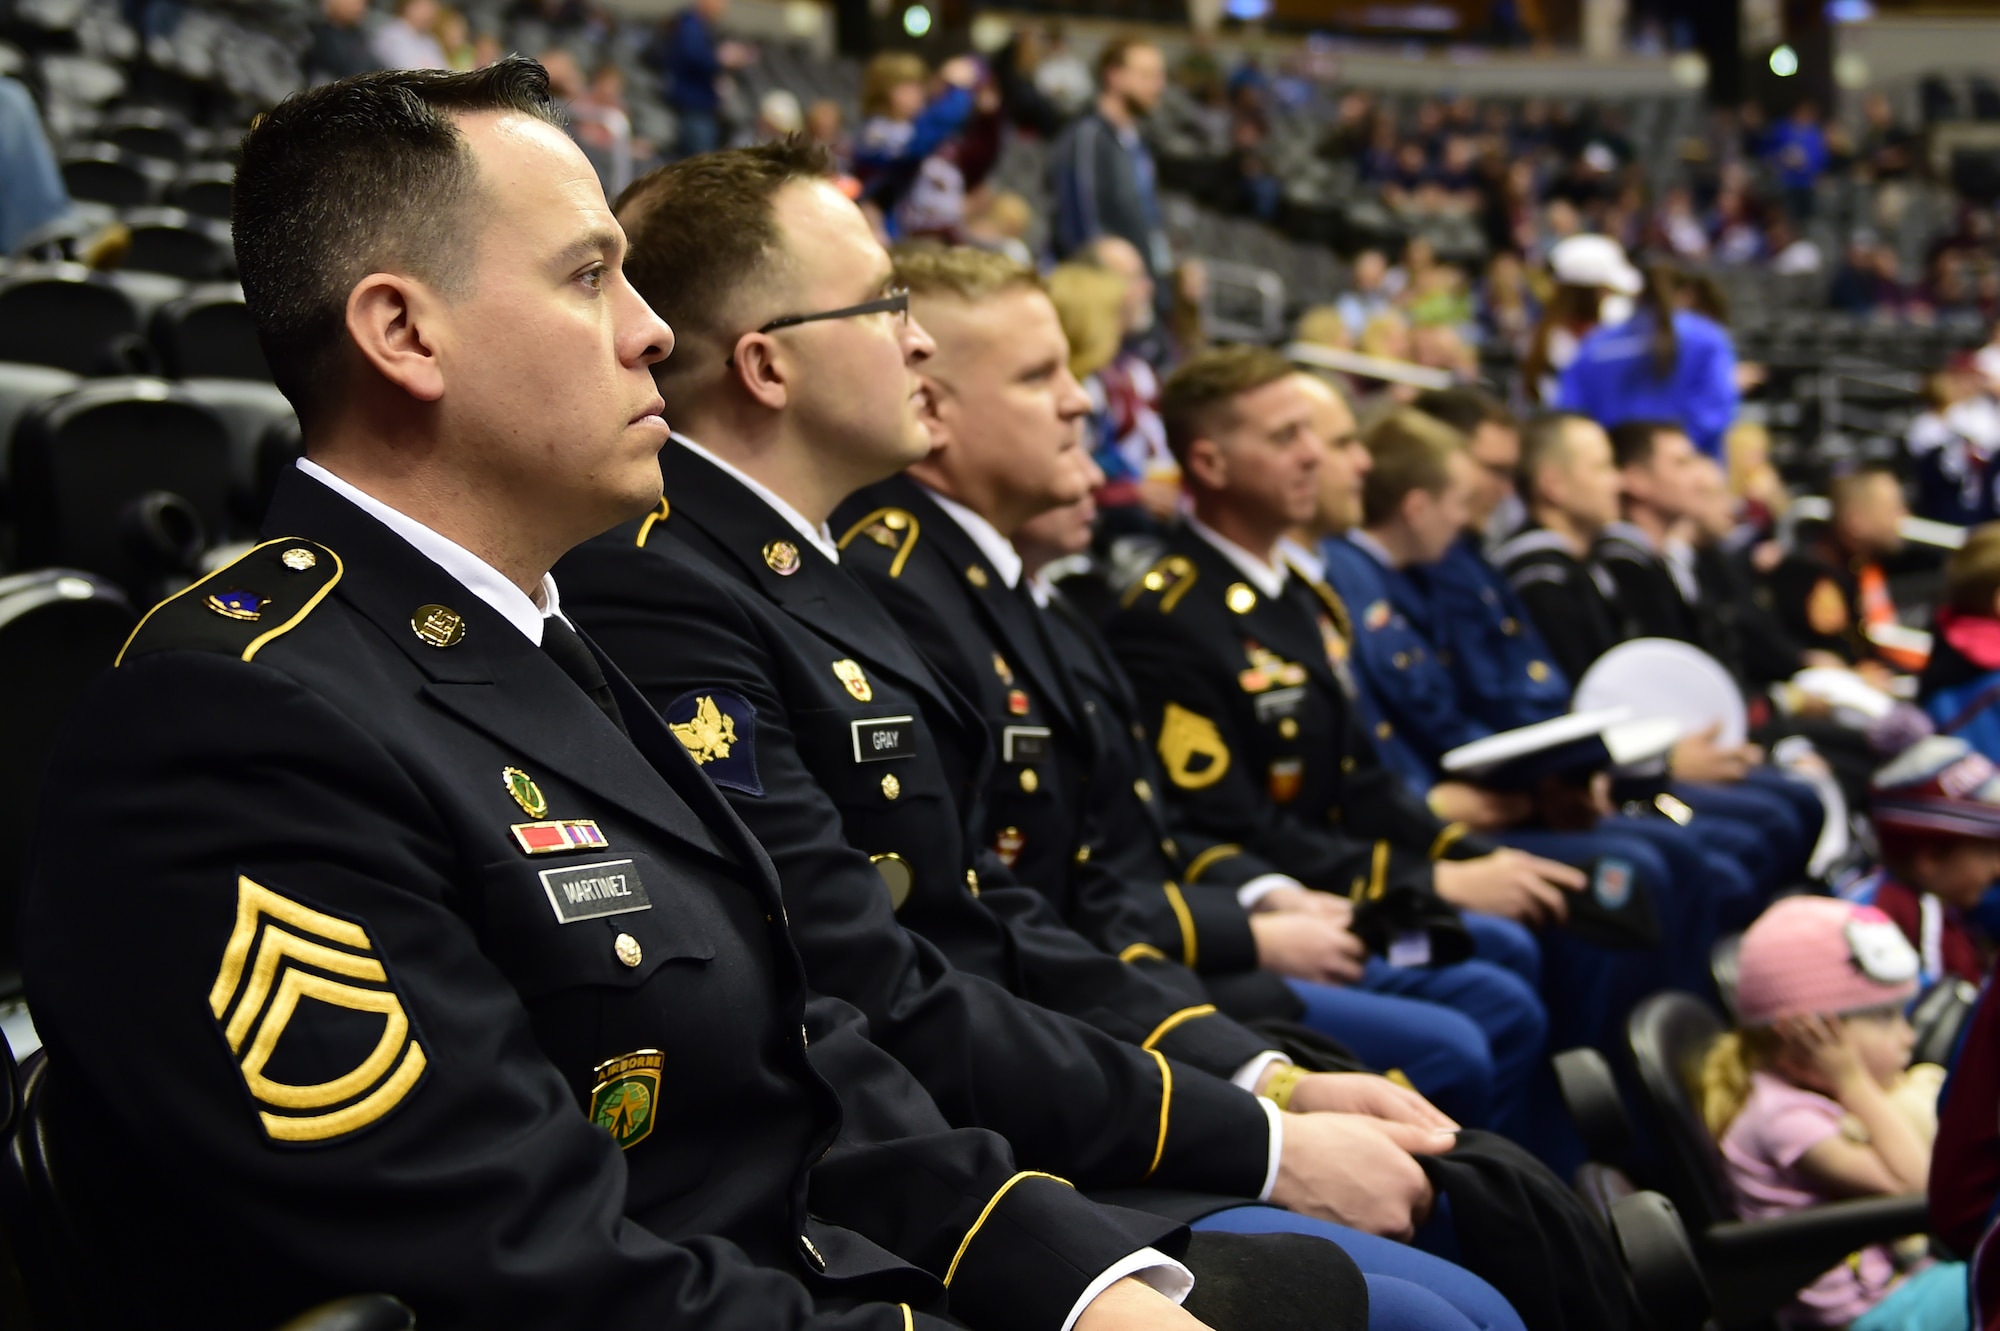 Military members watch the pregame warm-up before the game between the Colorado Avalanche and the Nashville Predators March 5, 2016, at the Pepsi Center in Denver, Colo. The Avalanche held the fifth annual “Military Appreciation Day” to honor military members for their service to the United States. (U.S. Air Force photo by Airman 1st Class Luke W. Nowakowski/Released)